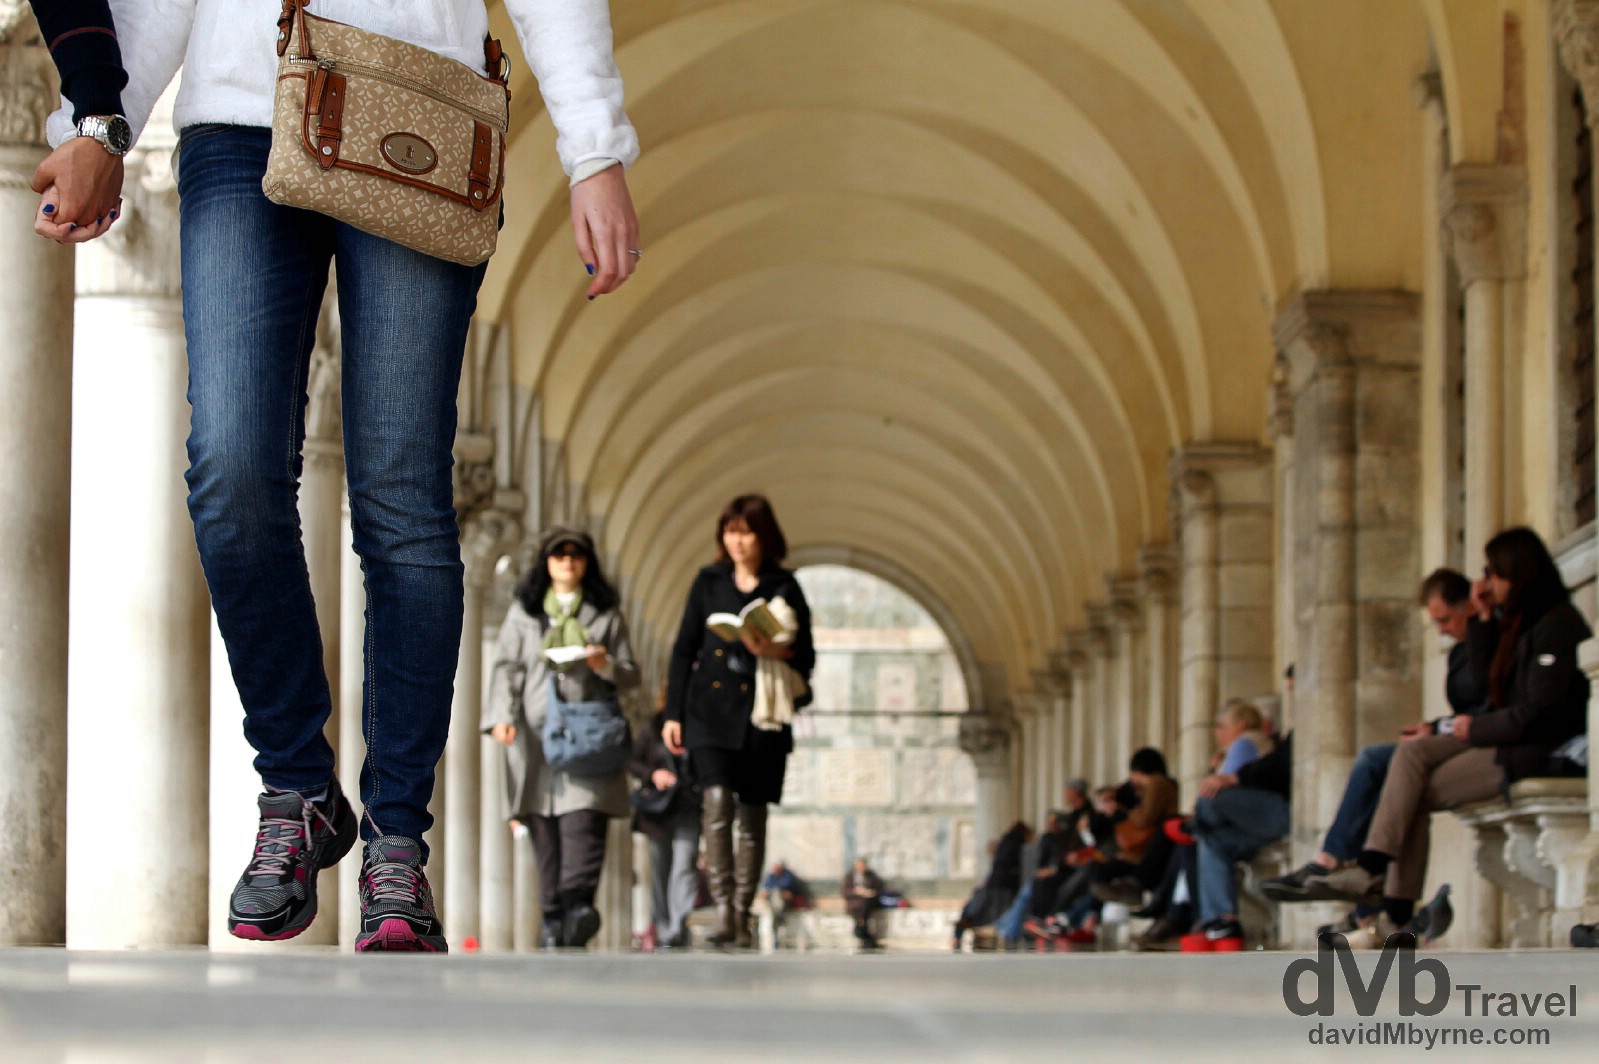 Walking under the arches of Palazzo Ducale, Venice, Italy. March 19th, 2014.